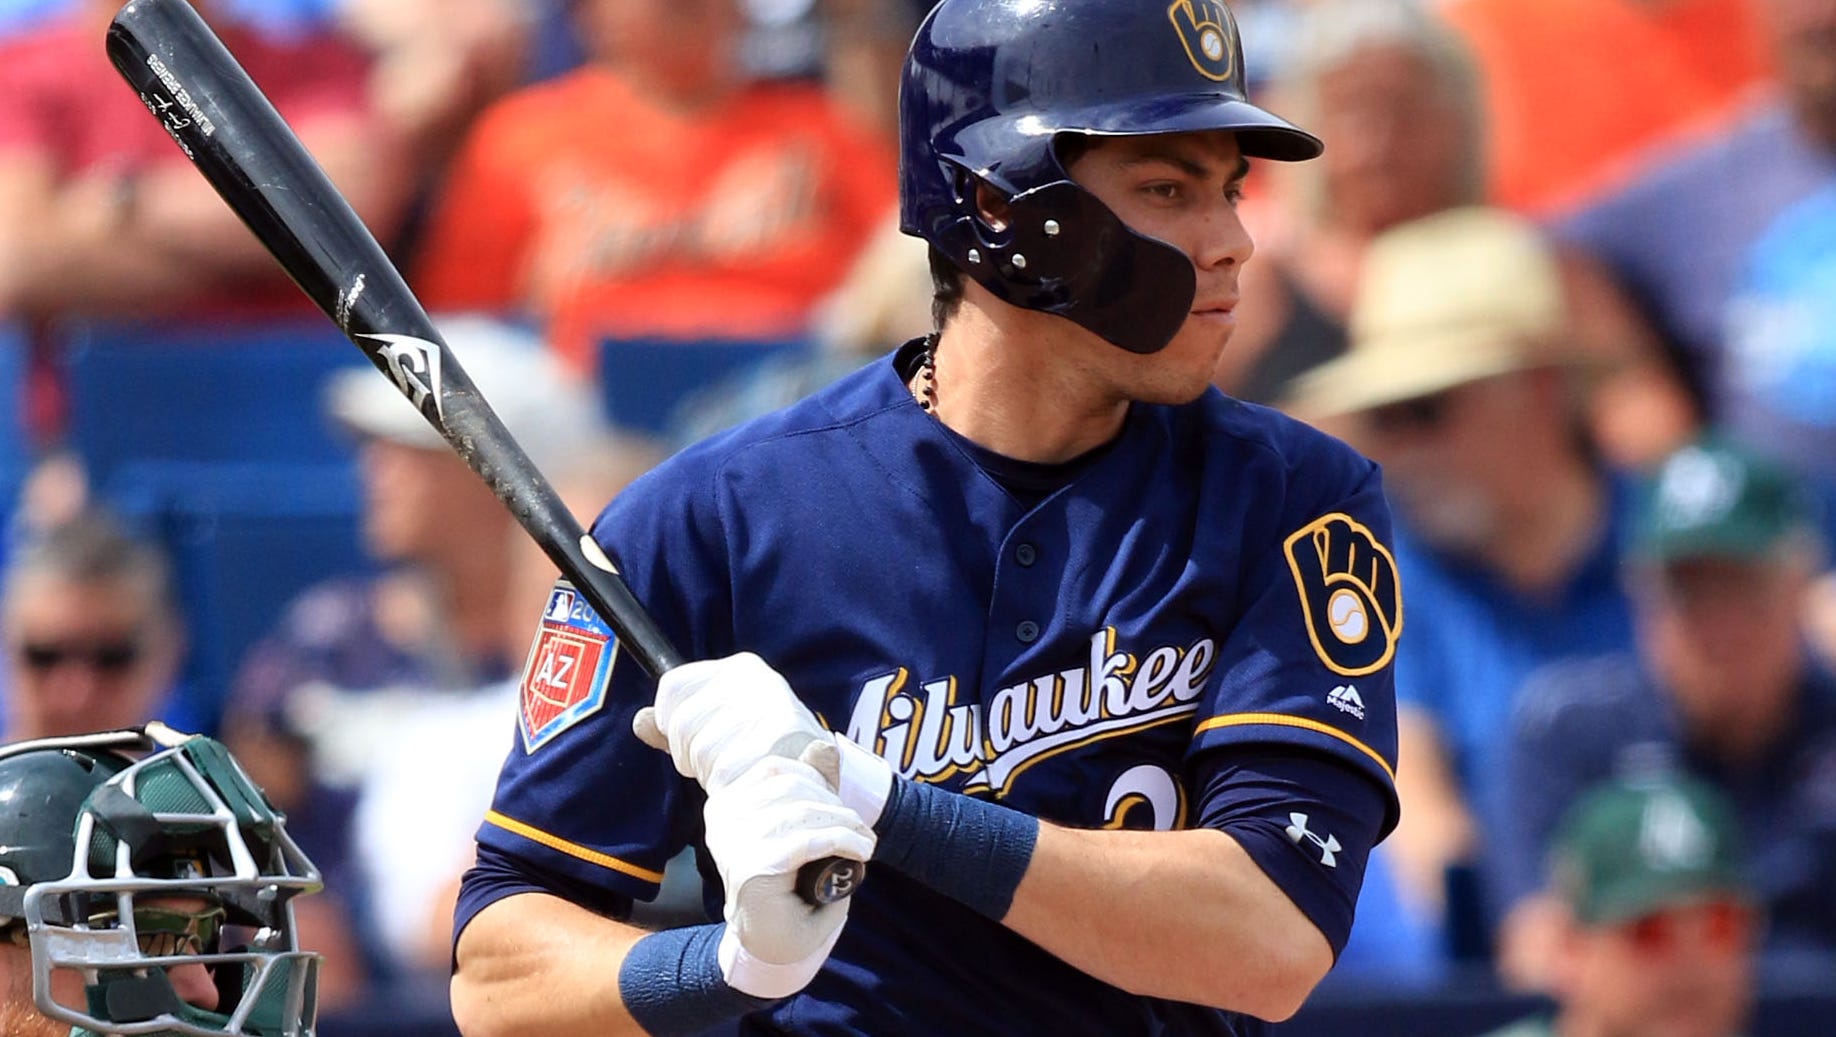 Our 125 ranking of the 2018 Milwaukee Brewers roster